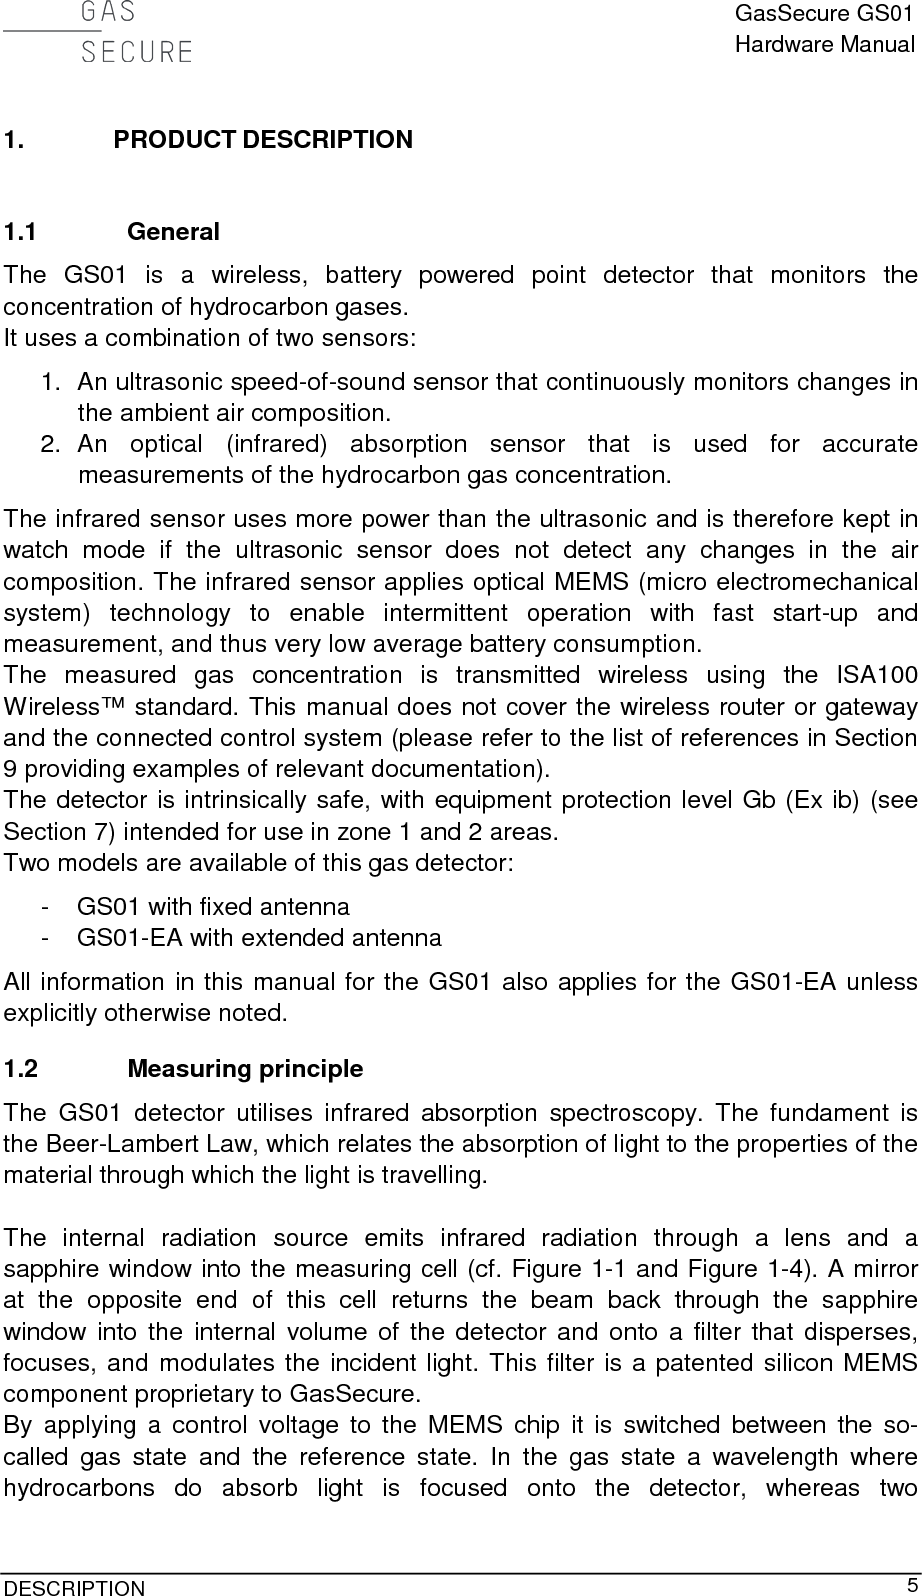  GasSecure GS01 Hardware Manual  DESCRIPTION     5 1. PRODUCT DESCRIPTION  1.1 General The GS01 is a wireless, battery powered point detector that monitors the concentration of hydrocarbon gases. It uses a combination of two sensors: 1. An ultrasonic speed-of-sound sensor that continuously monitors changes in the ambient air composition. 2. An optical (infrared) absorption sensor that is used for accurate measurements of the hydrocarbon gas concentration. The infrared sensor uses more power than the ultrasonic and is therefore kept in watch mode if the ultrasonic sensor  does not detect any changes in the air composition. The infrared sensor applies optical MEMS (micro electromechanical system)  technology  to  enable intermittent operation with fast start-up and measurement, and thus very low average battery consumption. The measured gas  concentration is transmitted wireless using the ISA100 Wireless™ standard. This manual does not cover the wireless router or gateway and the connected control system (please refer to the list of references in Section 9 providing examples of relevant documentation). The detector is intrinsically safe, with equipment protection level Gb (Ex ib) (see Section 7) intended for use in zone 1 and 2 areas. Two models are available of this gas detector: -  GS01 with fixed antenna -  GS01-EA with extended antenna All information in this manual for the GS01 also applies for the GS01-EA unless explicitly otherwise noted. 1.2 Measuring principle The  GS01 detector utilises infrared absorption spectroscopy.  The fundament is the Beer-Lambert Law, which relates the absorption of light to the properties of the material through which the light is travelling.  The internal radiation source emits infrared radiation through a lens and a sapphire window into the measuring cell (cf. Figure 1-1 and Figure 1-4). A mirror at the opposite end of this cell returns the beam back through the sapphire window into the internal volume of the detector and onto a filter that disperses, focuses, and modulates the incident light. This filter is a patented silicon MEMS component proprietary to GasSecure. By applying a control voltage to the MEMS chip it is switched between the so-called gas state and the reference state. In the gas state a wavelength where hydrocarbons do absorb light is focused onto the detector, whereas two 